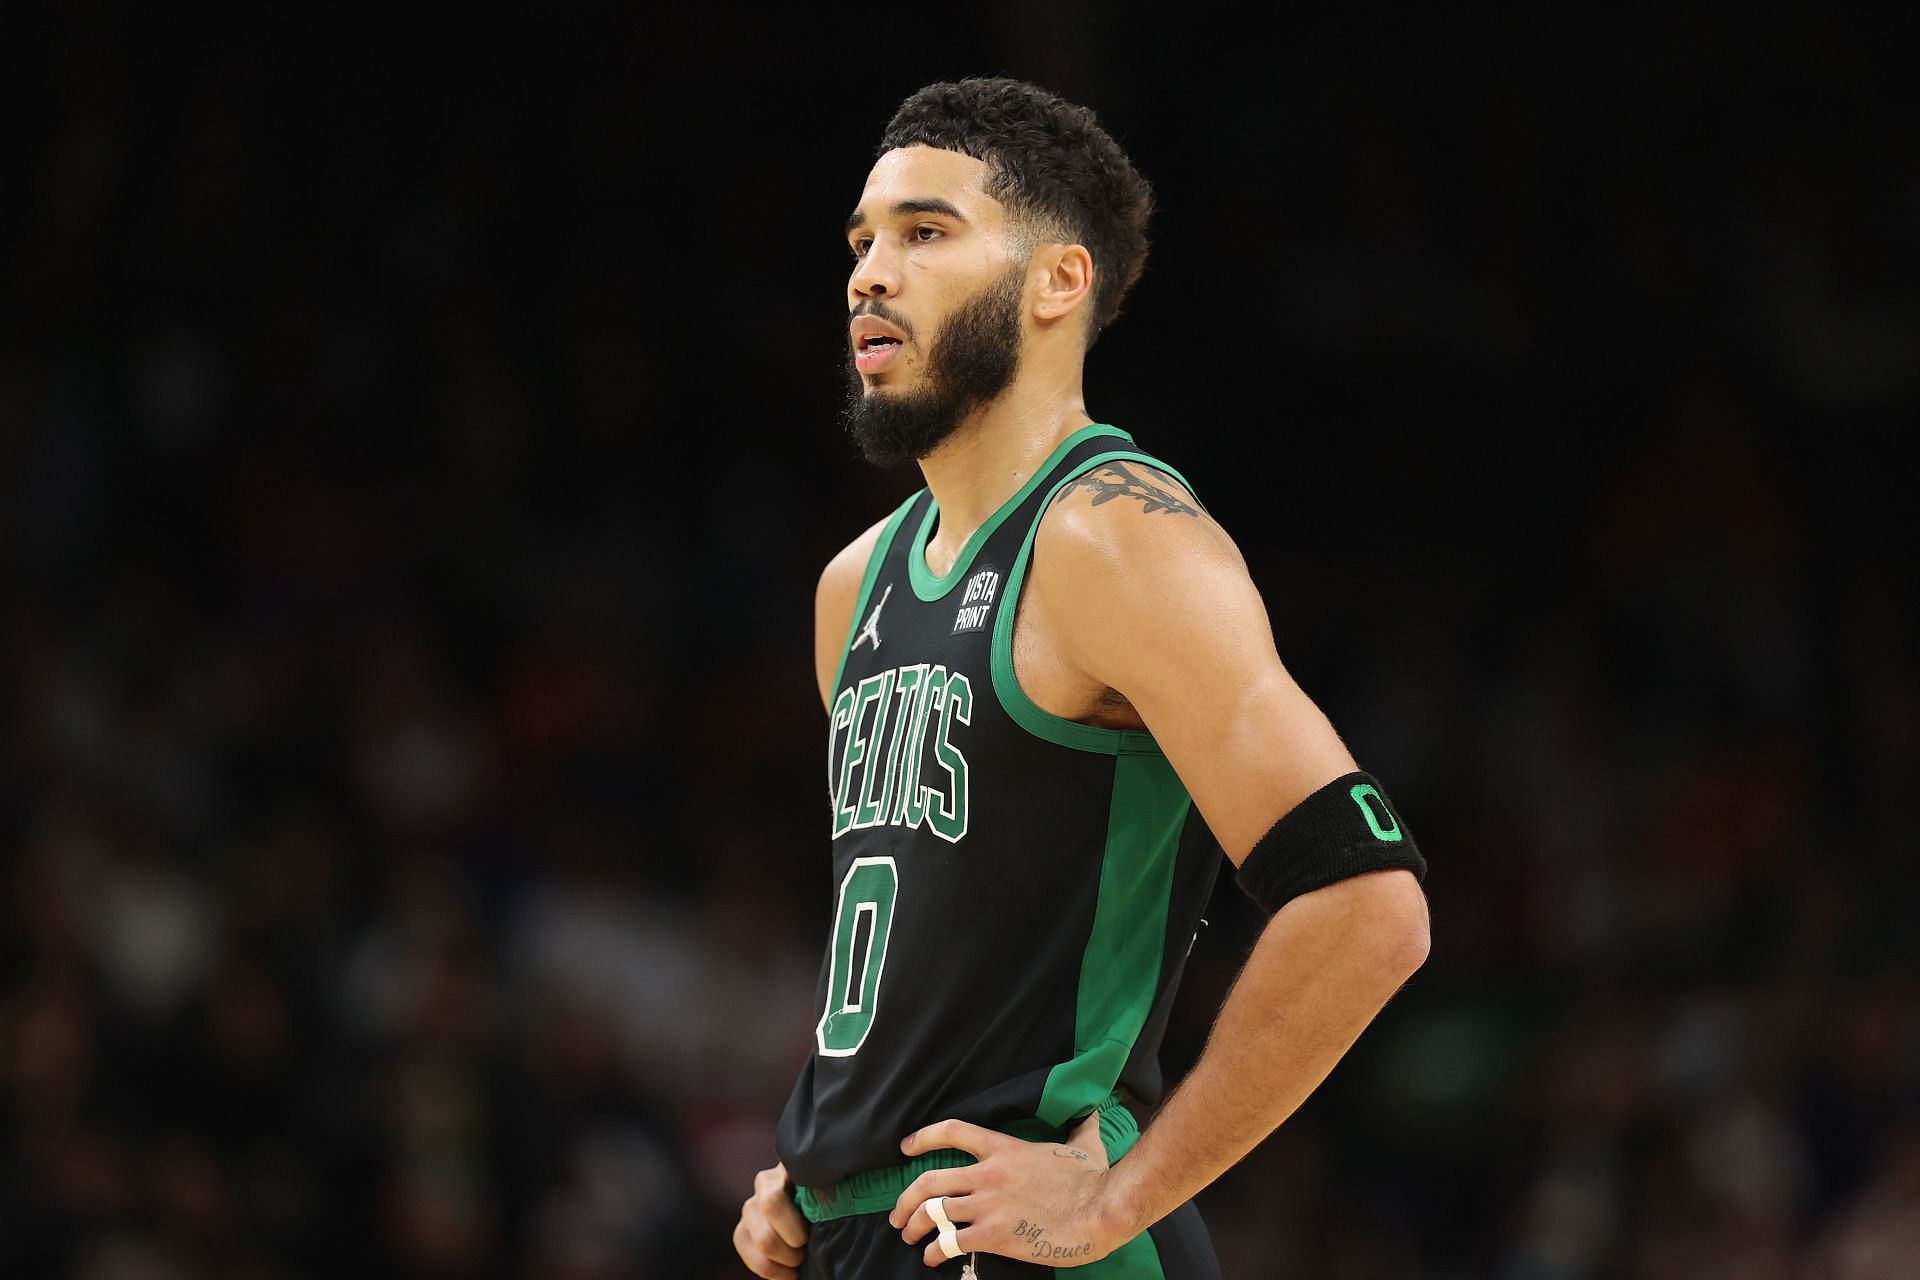 Jayson Tatum will be questionable for the game against the Orlando Magic